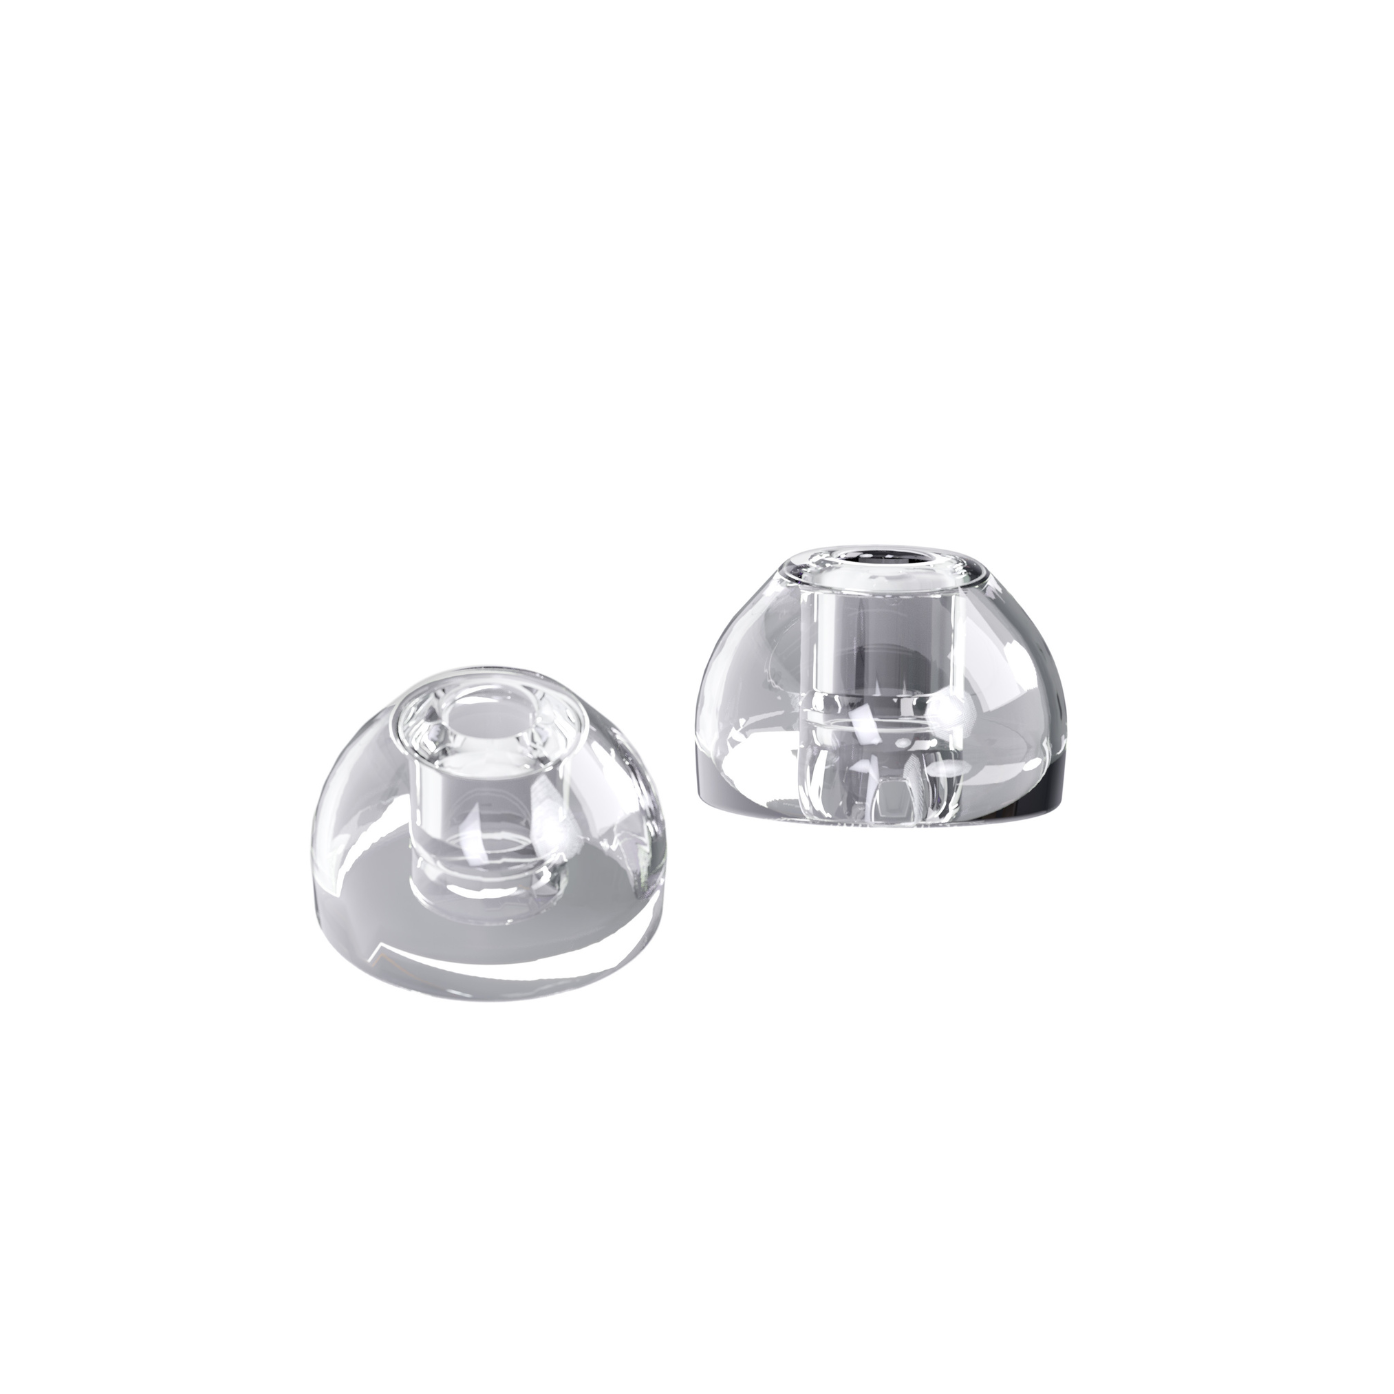 Replacement Eartips for Clicks and Earlights (Transparent)